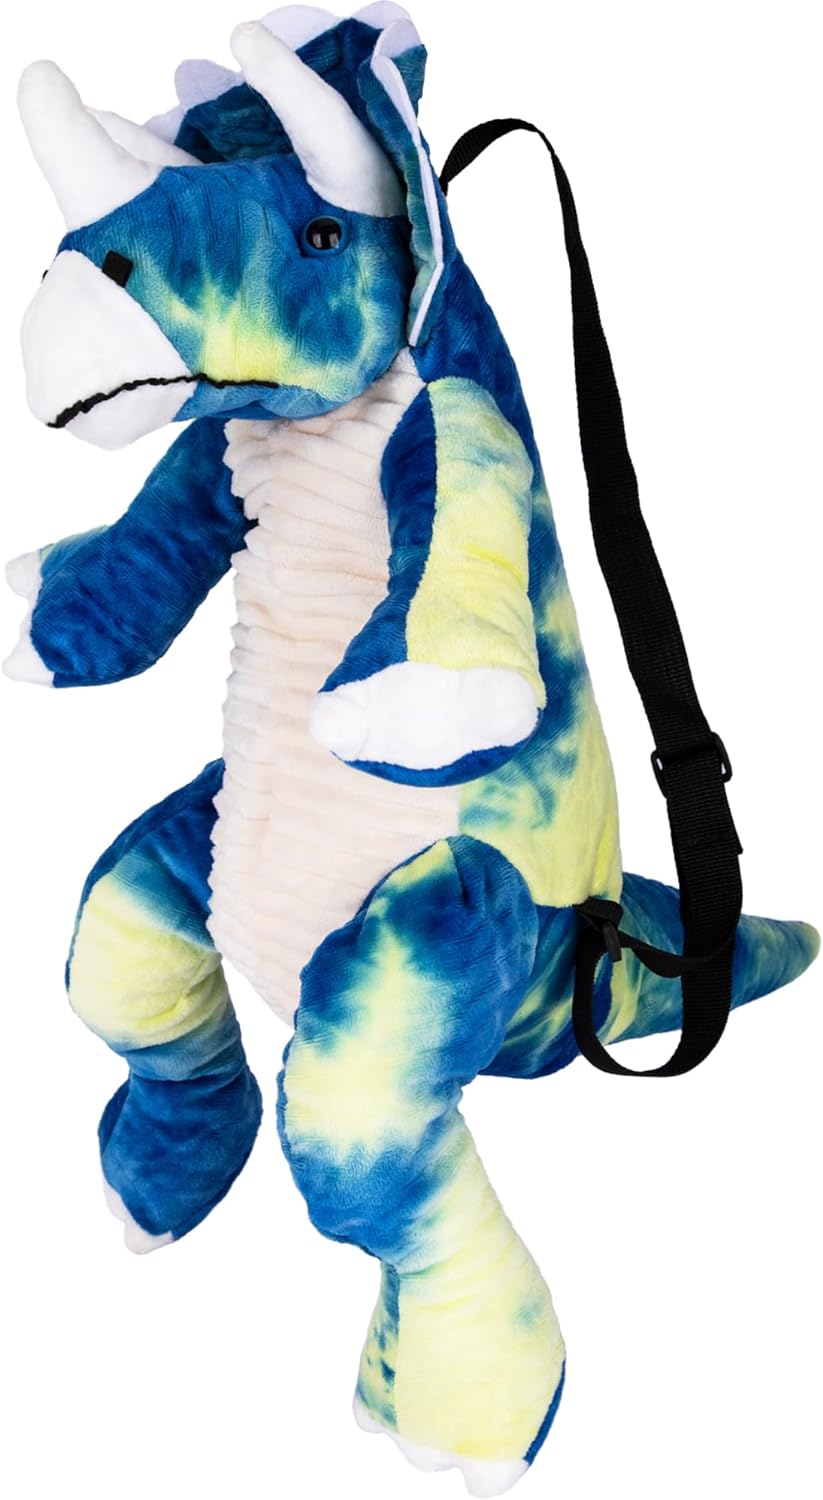 ArtCreativity Plush Dinosaur Backpack, 22" Stuffed Animal Backpack in the Shape of a Triceratops, Plushie Dinosaur Backpack for Toddlers, Blue and Yellow tie dye Colors. Adjustable Nylon Straps